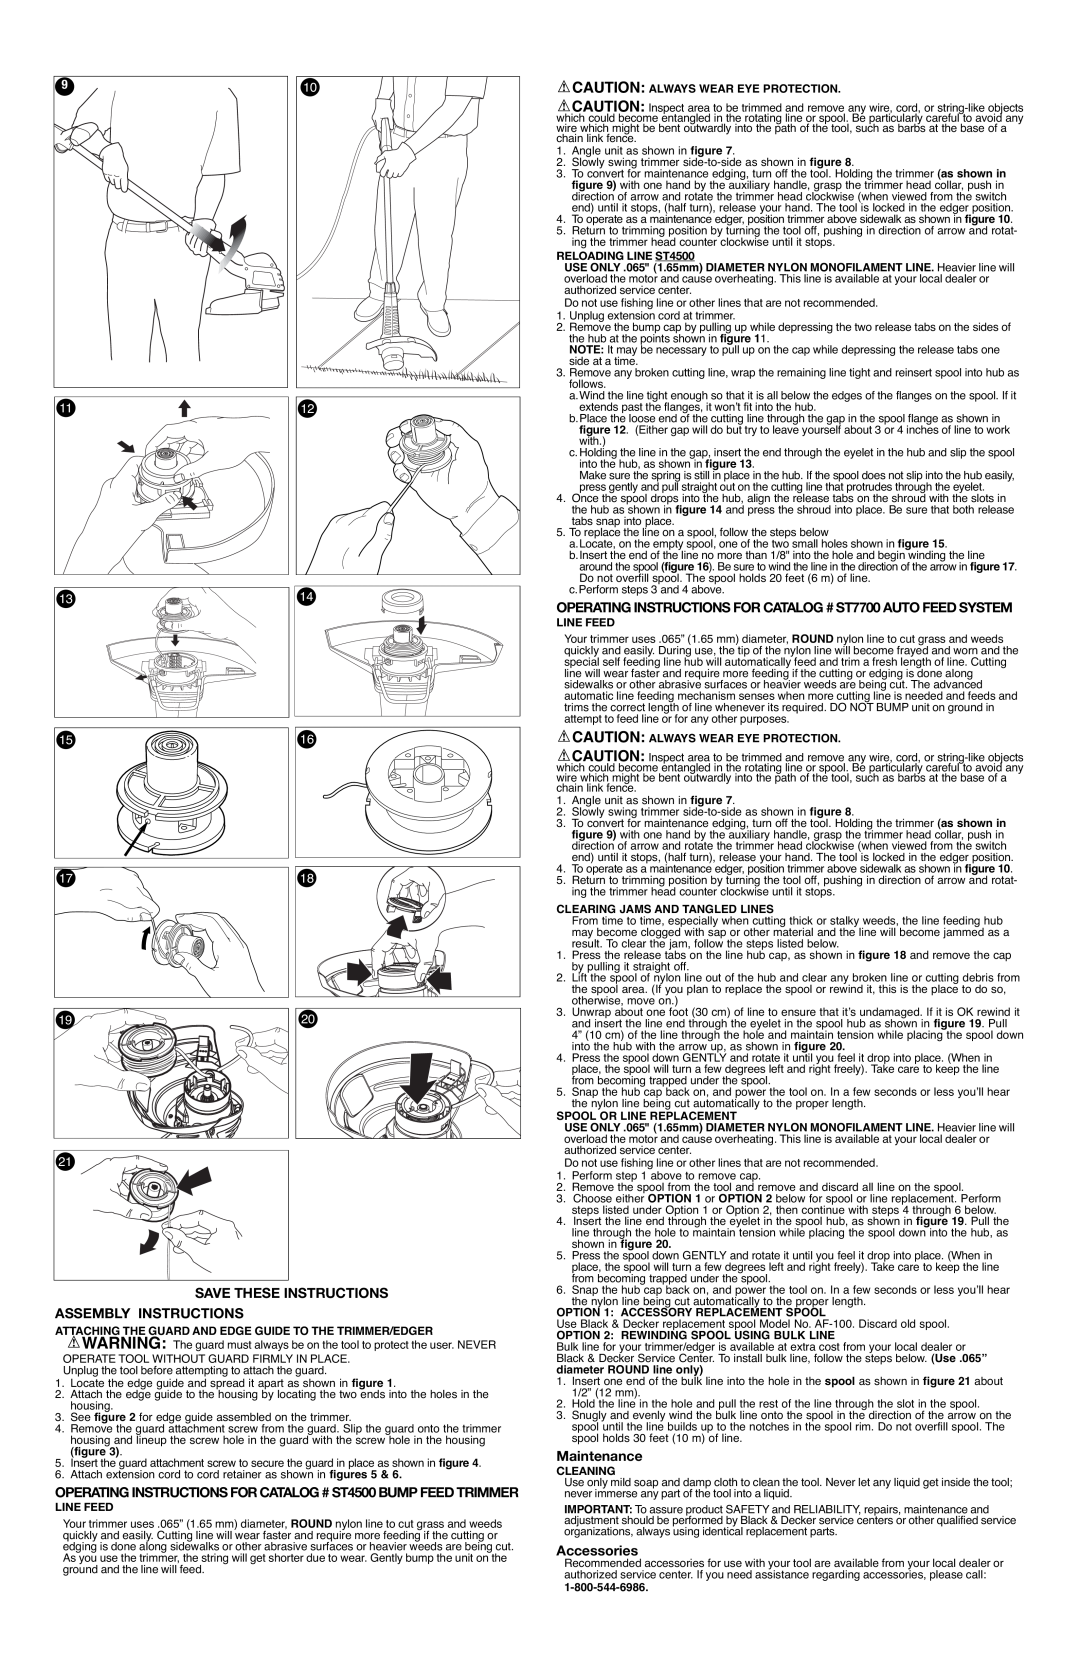 Black & Decker 90508813 Save These Instructions Assembly Instructions, Maintenance, Accessories, RELOADING LINE ST4500 